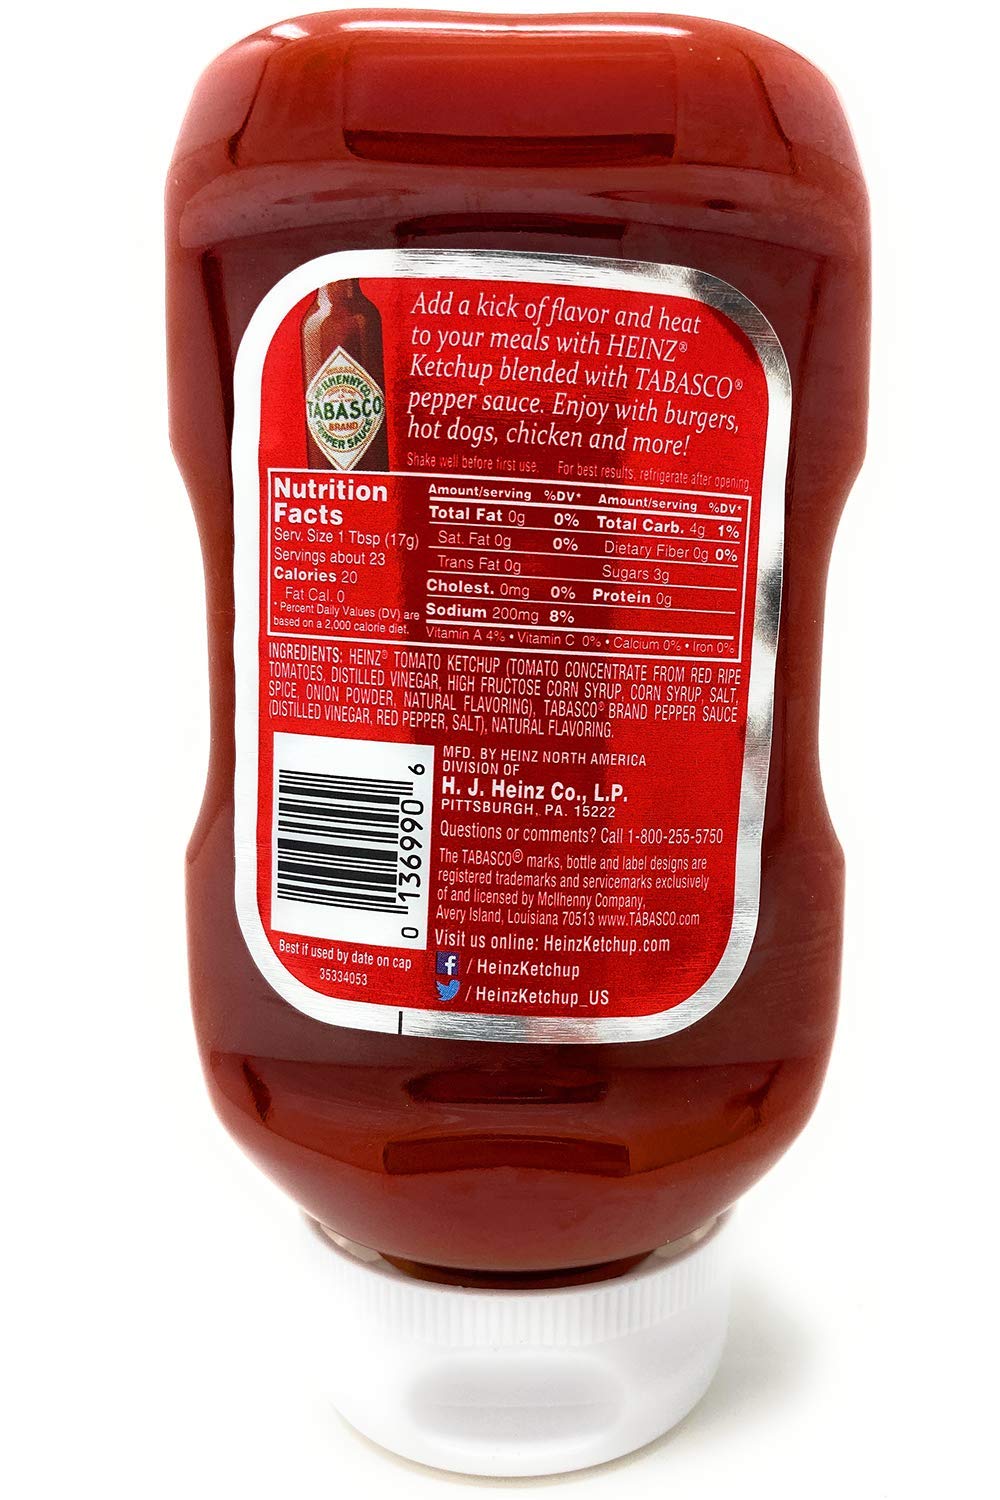 HEINZ HOT AND SPICY TOMATO KETCHUP 14 OZ